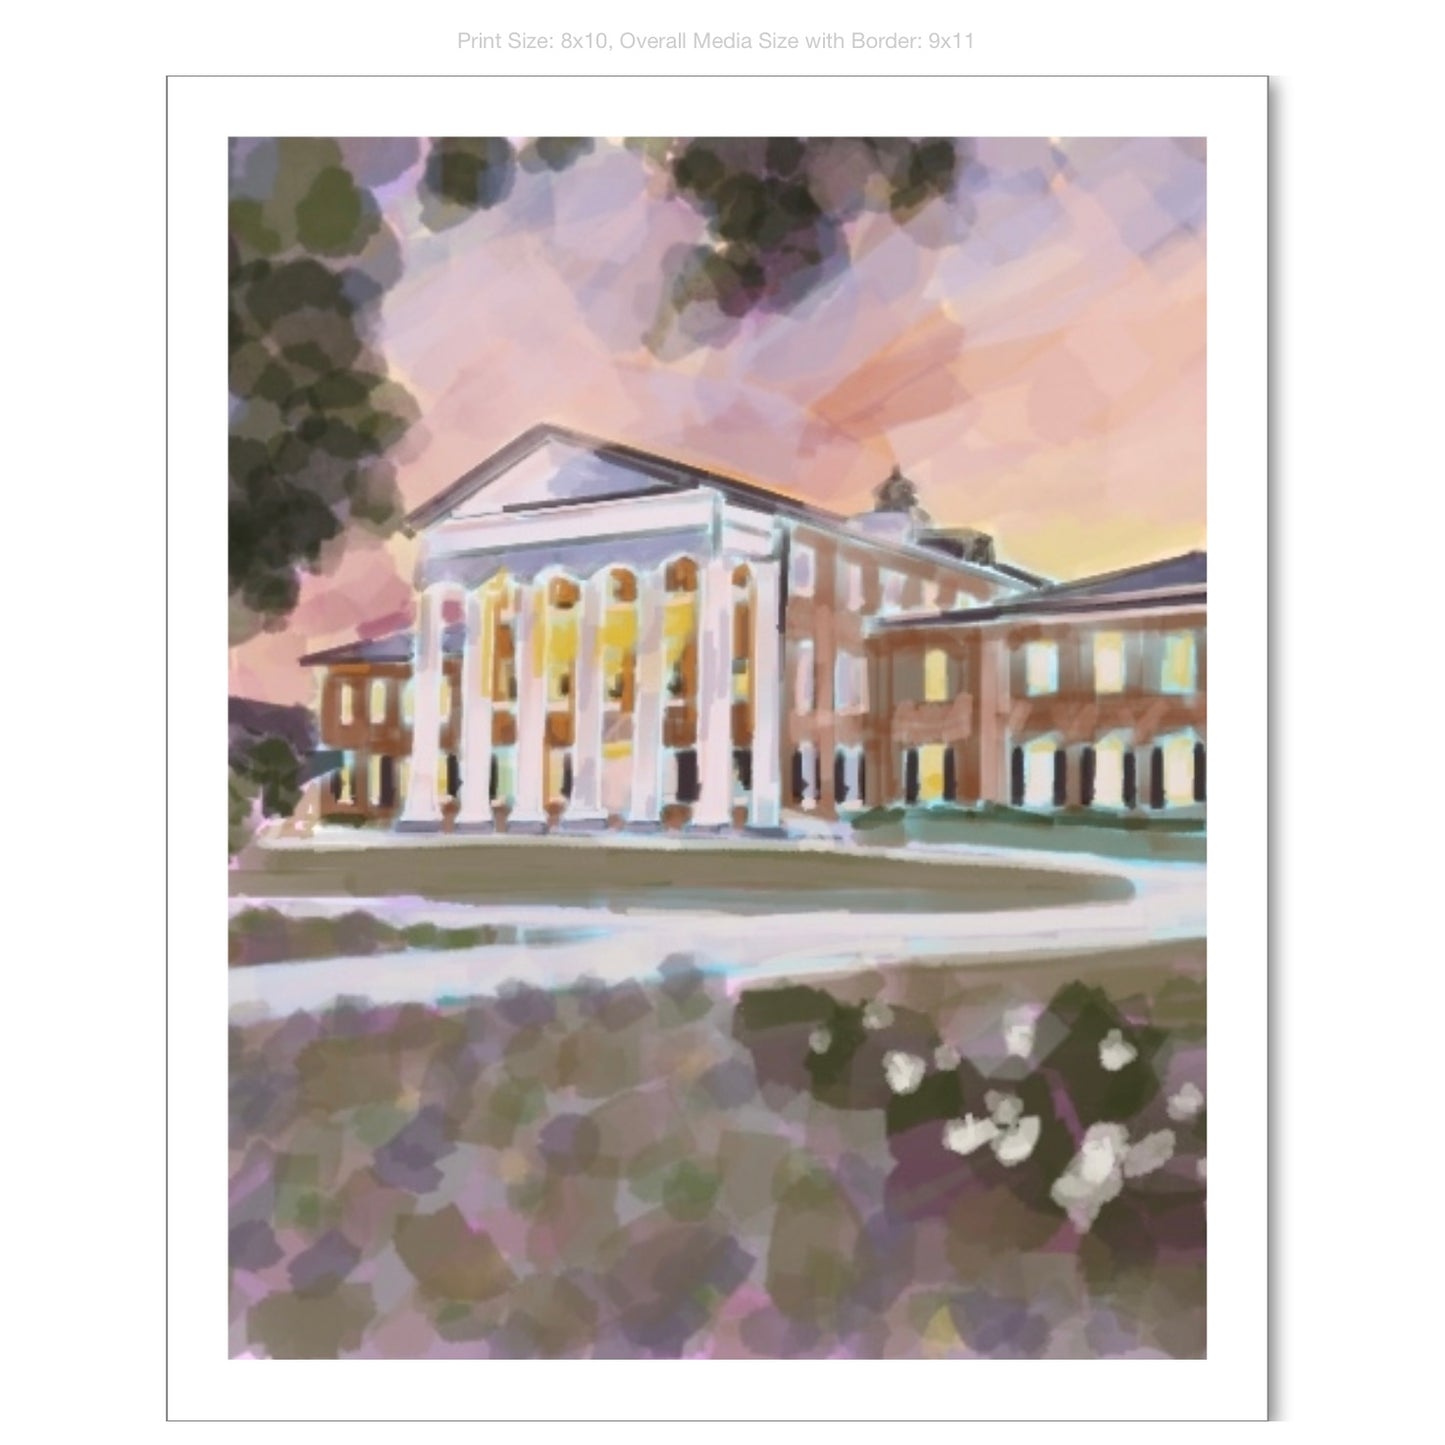 Ole Miss Campus Giclee on Premium Heavyweight Paper